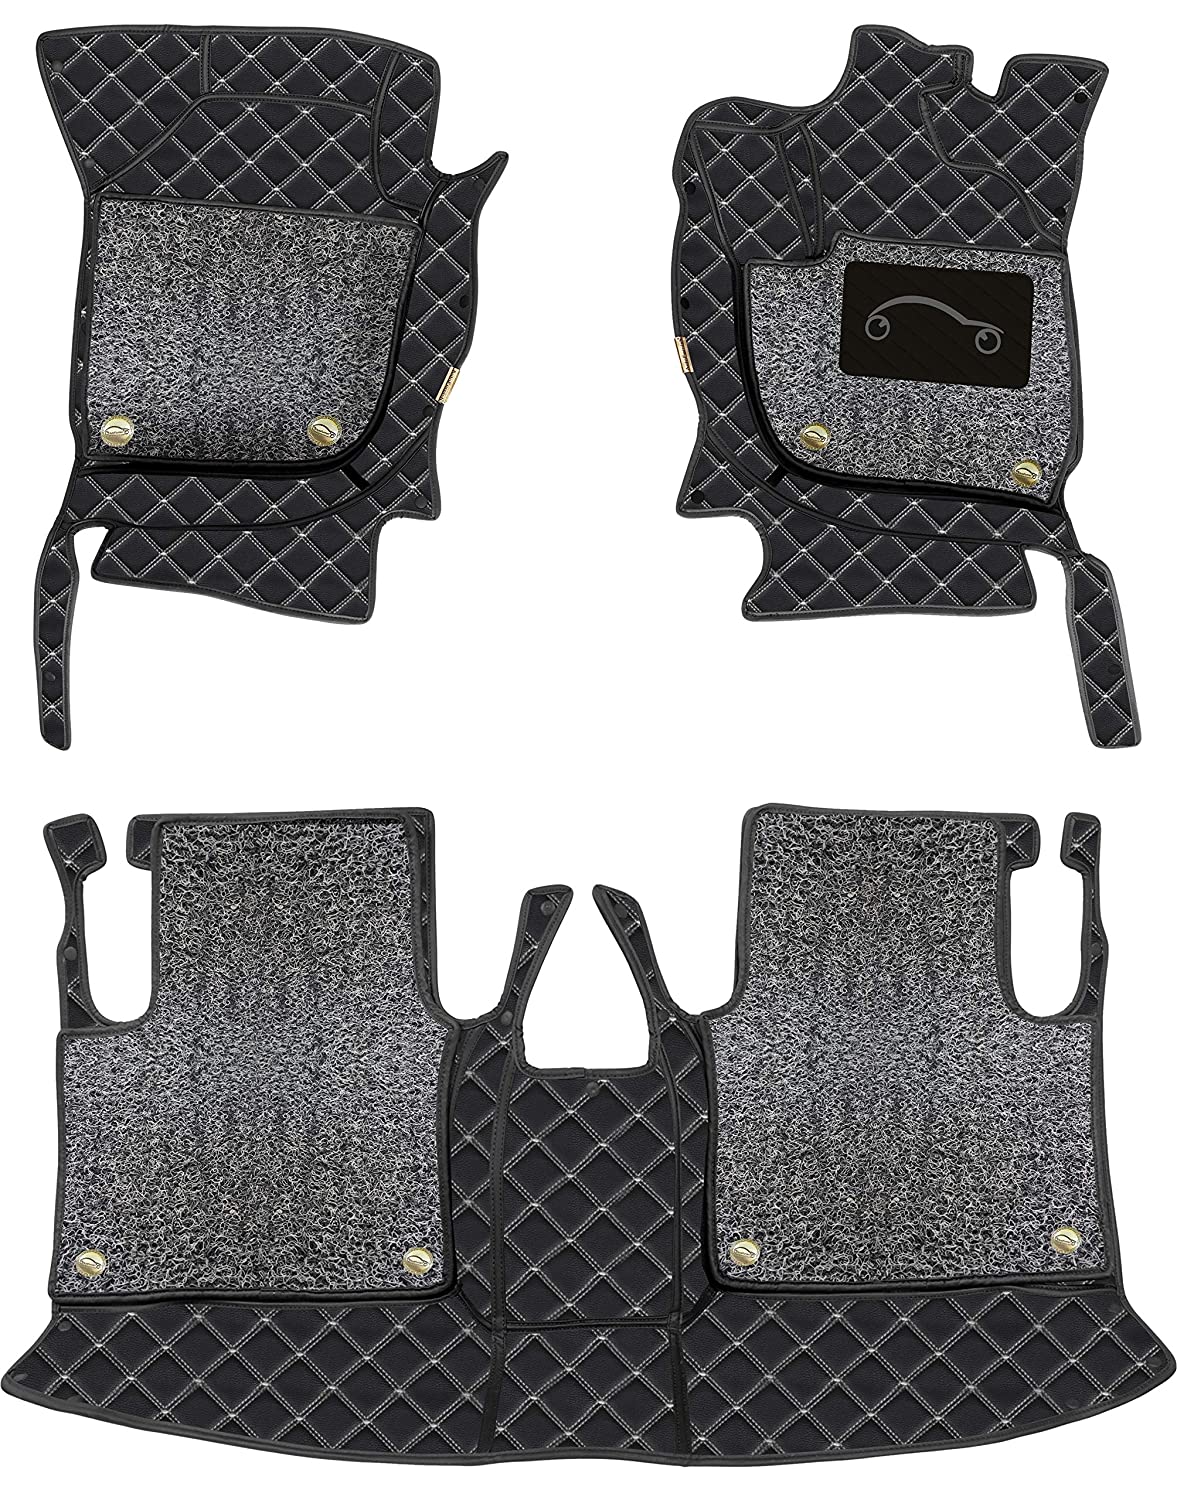 Porsche 718 Boxster 2019 7D Luxury Car Mat, All Weather Proof, Anti-Skid, 100% Waterproof & Odorless with Unique Diamond Fish Design (24mm Luxury PU Leather, 2 Rows)